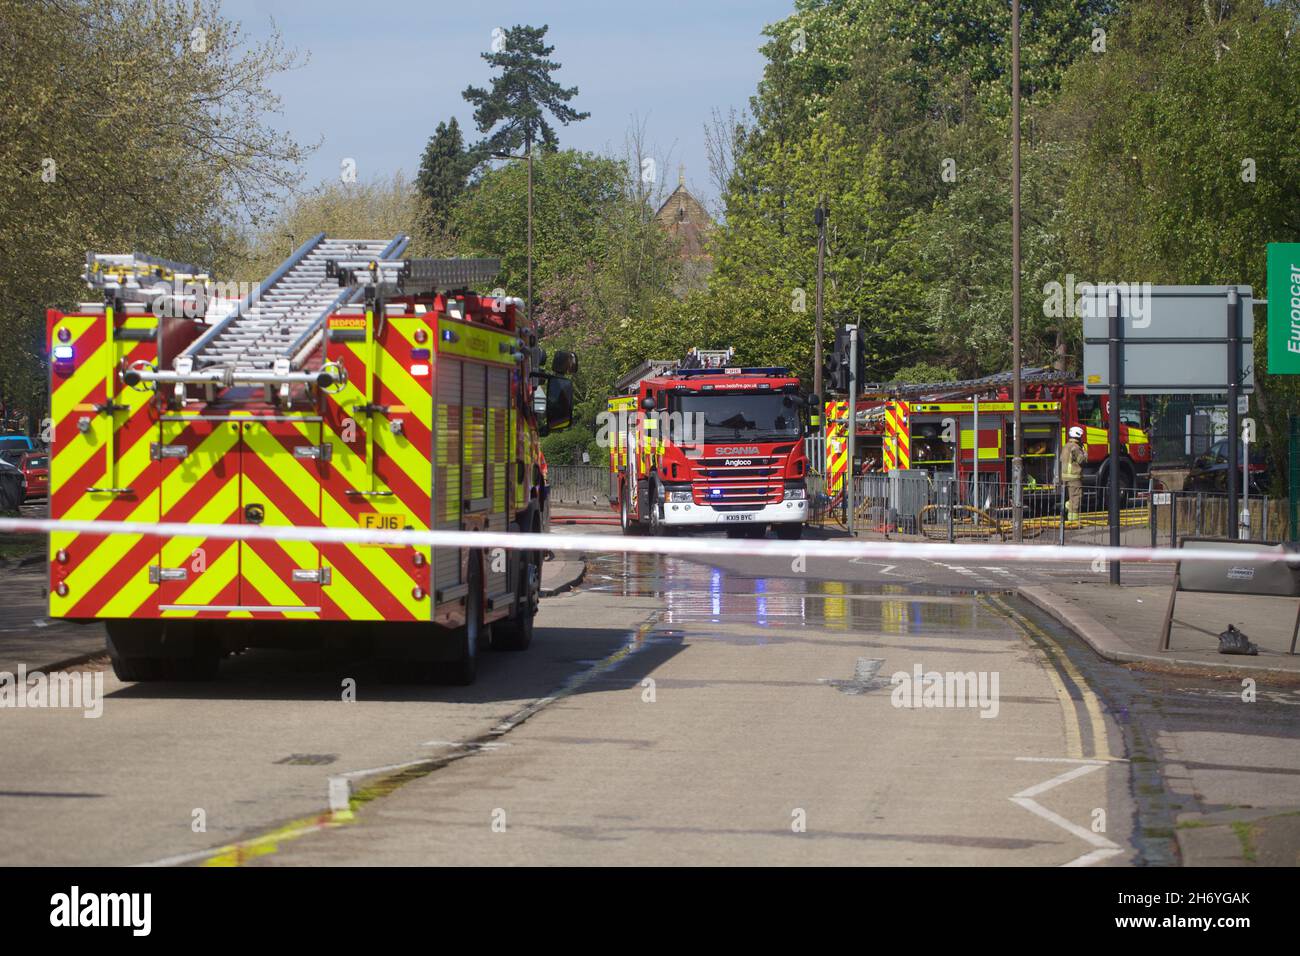 Fire engines in the street Stock Photo